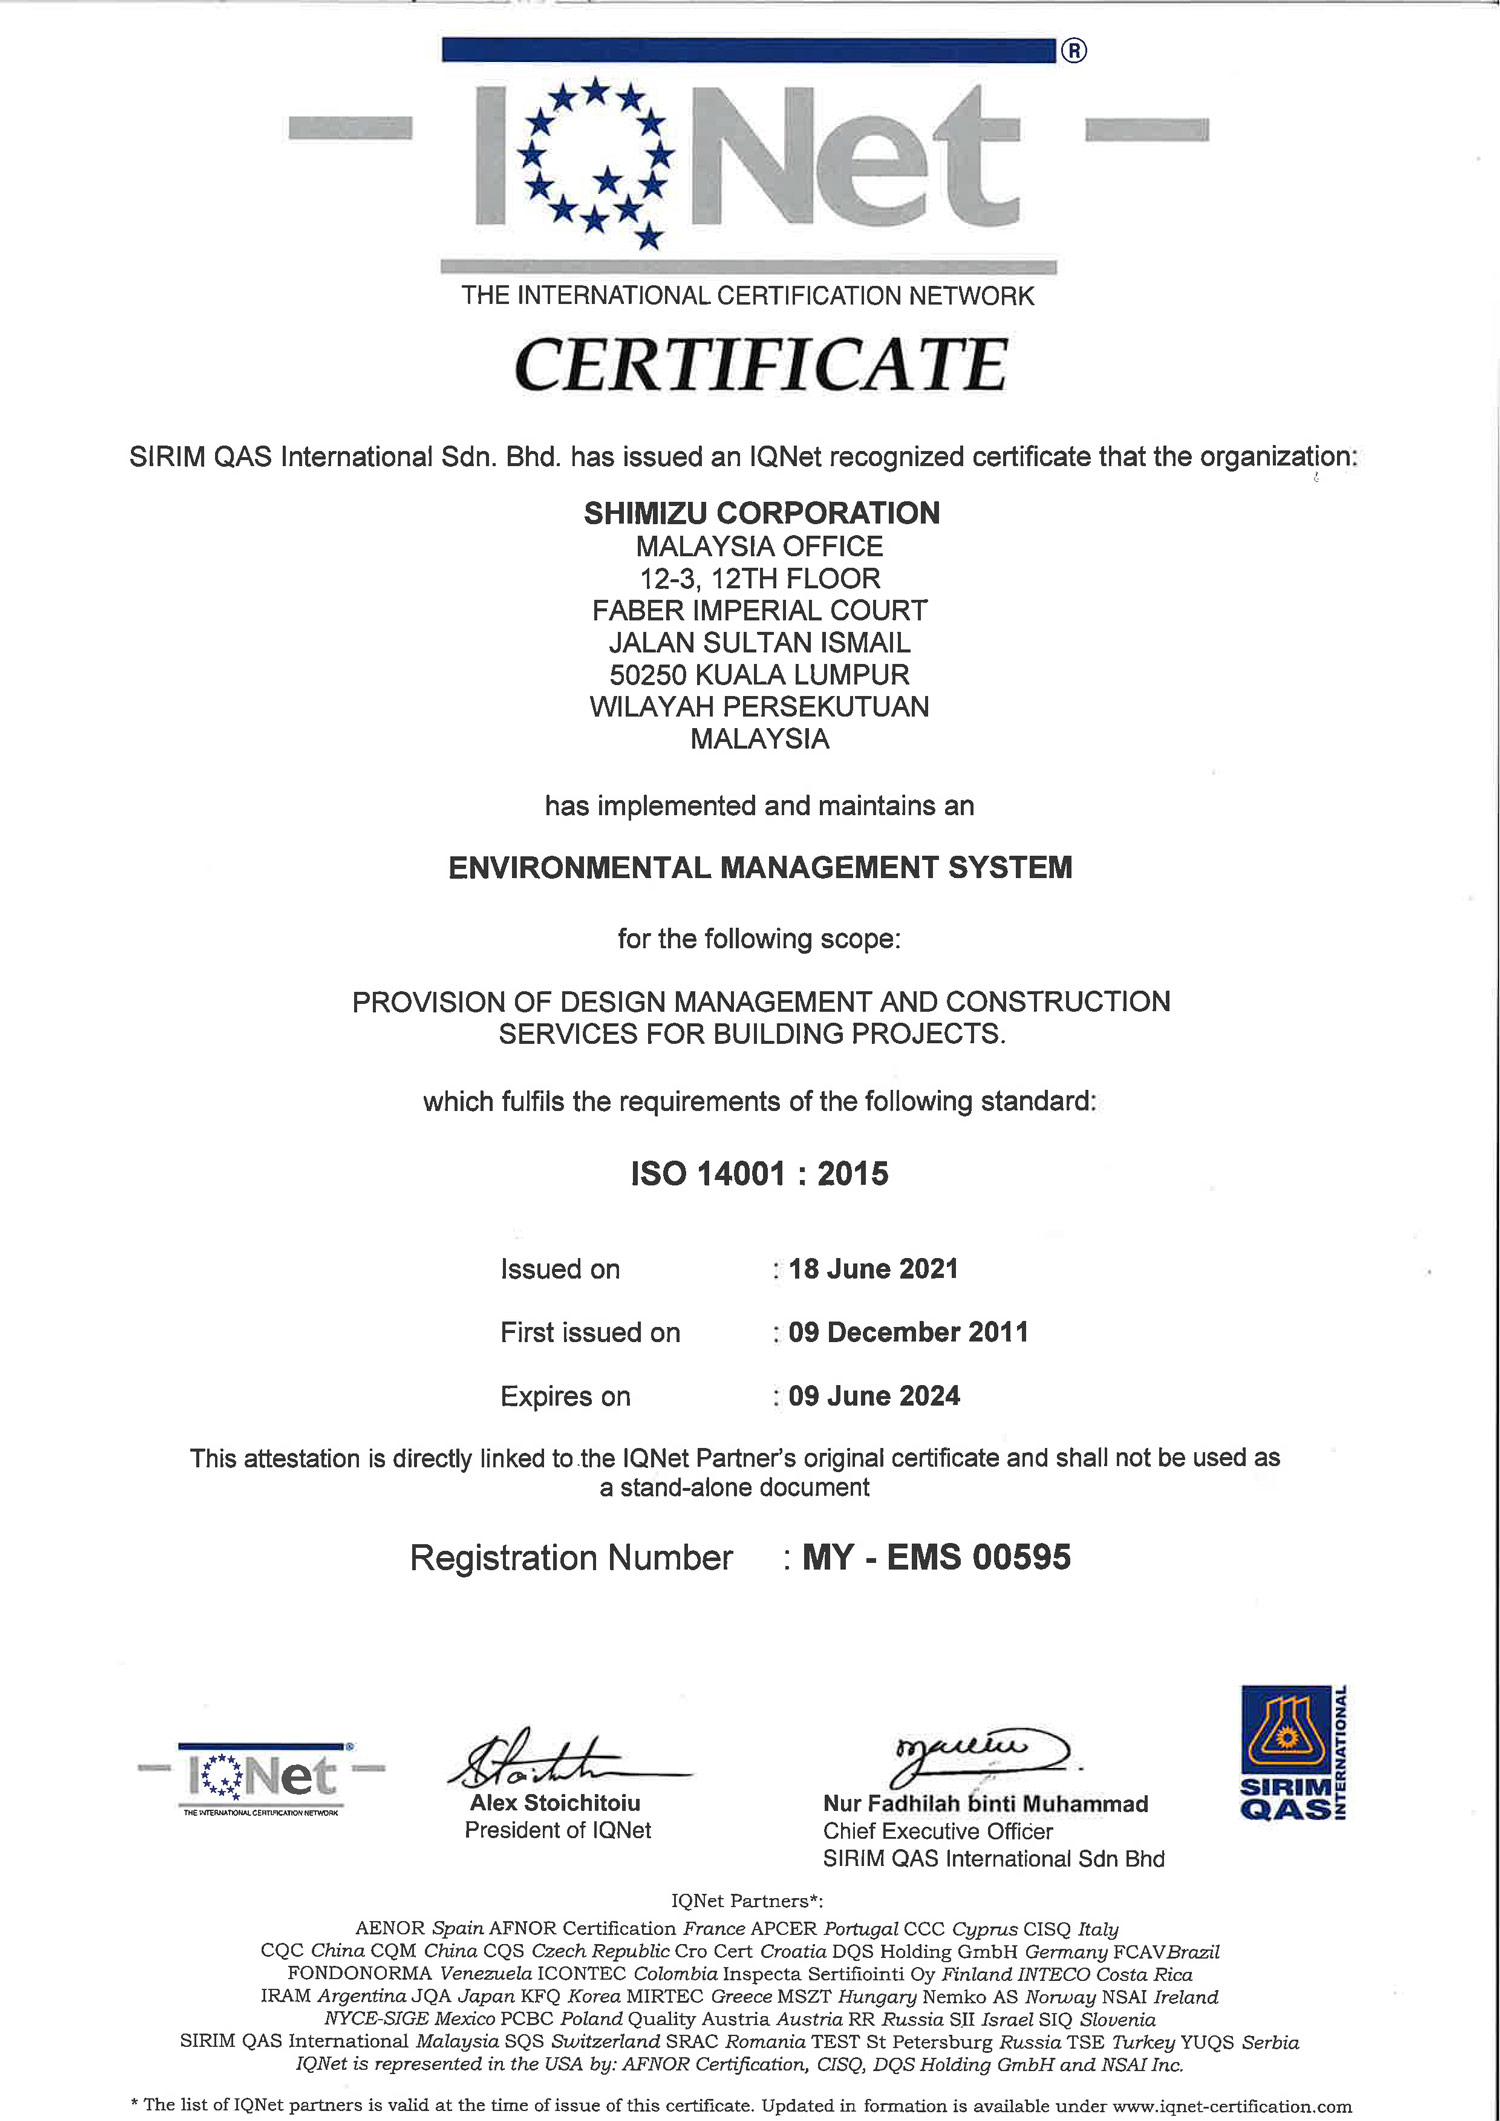 Environmental Management Systems - ISO 14001 2015 (IQNet)